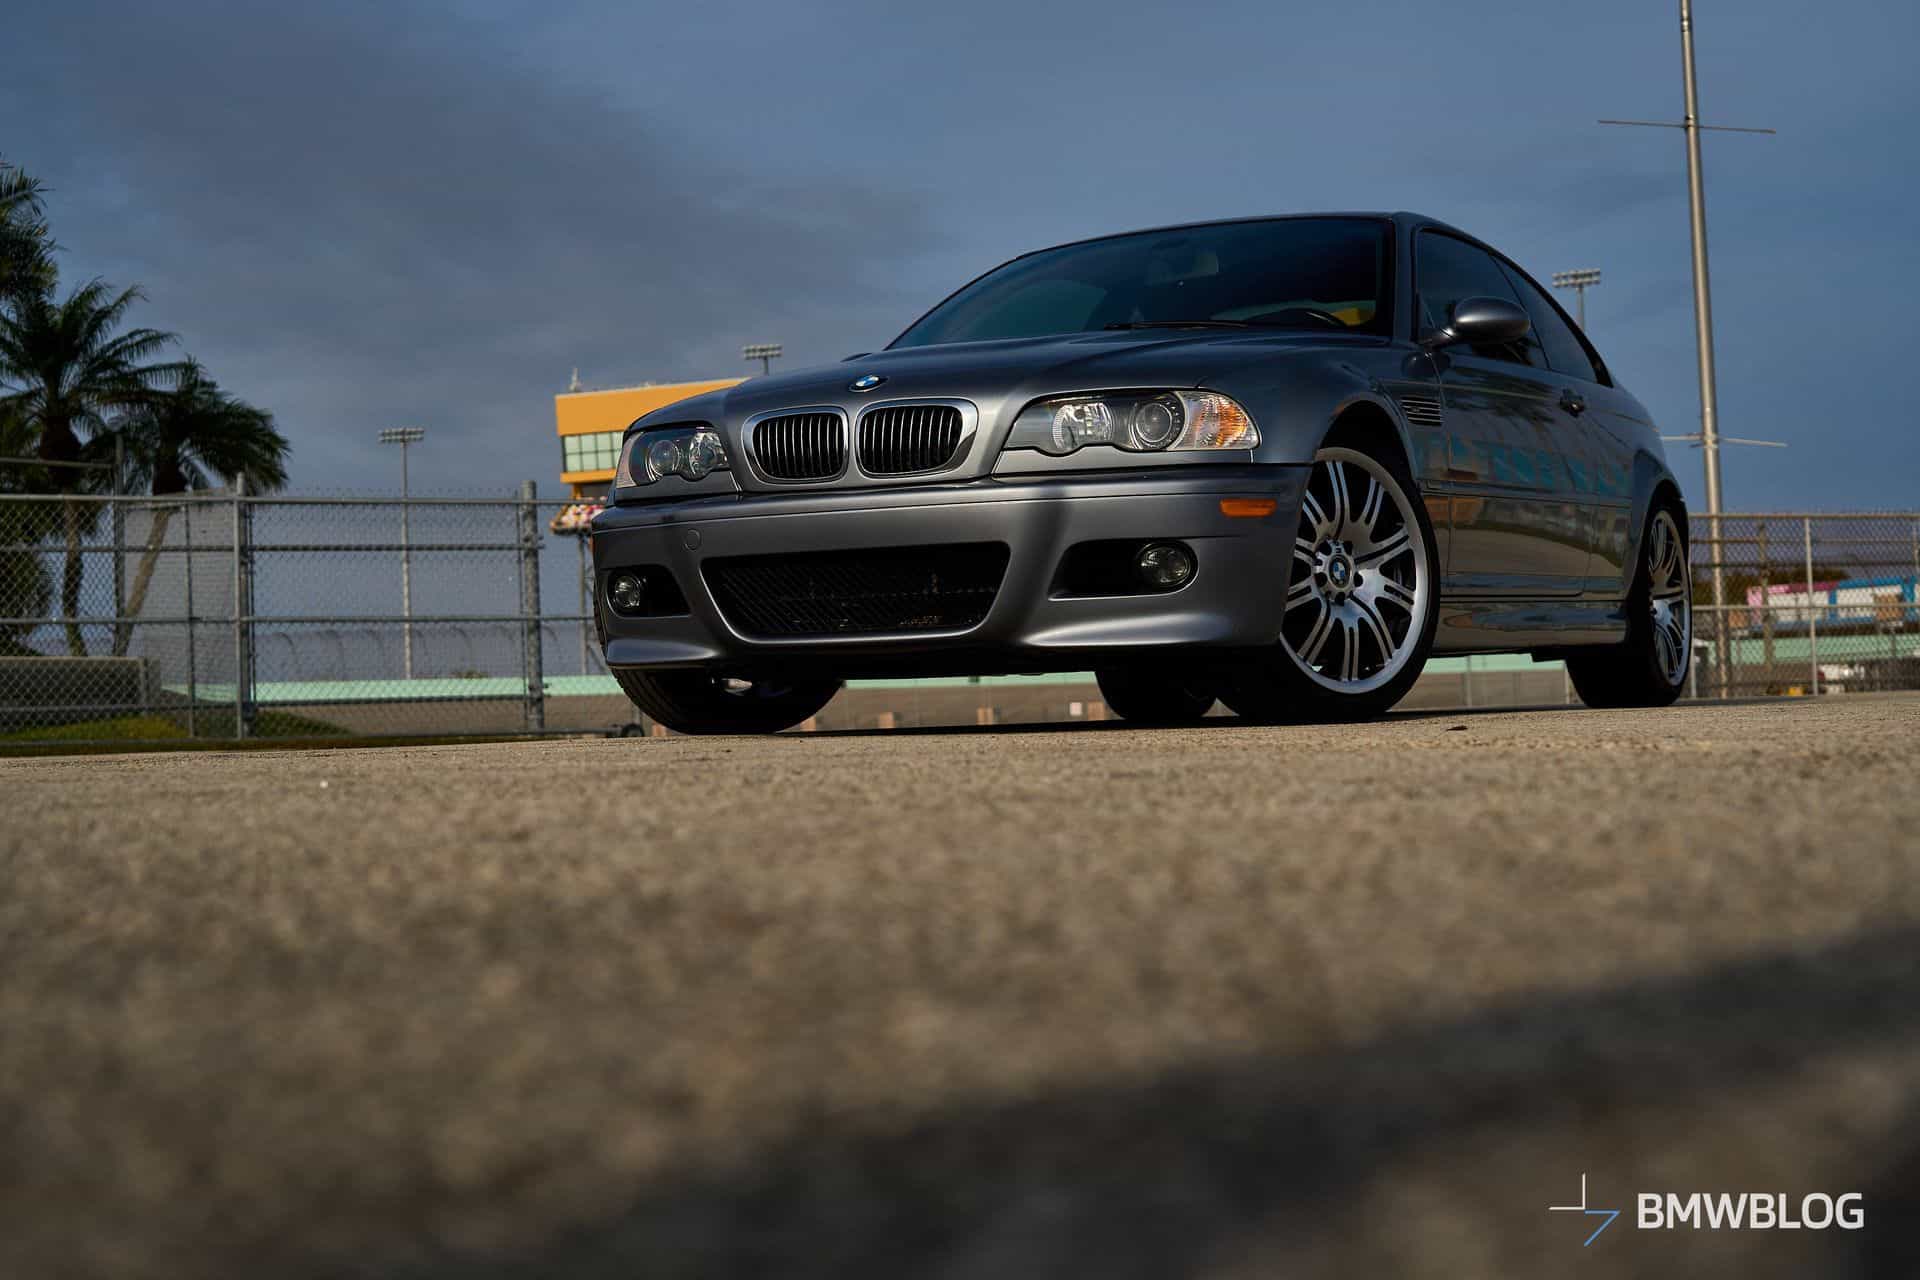 BMW E46 M3 Review – Is This A Future Classic?